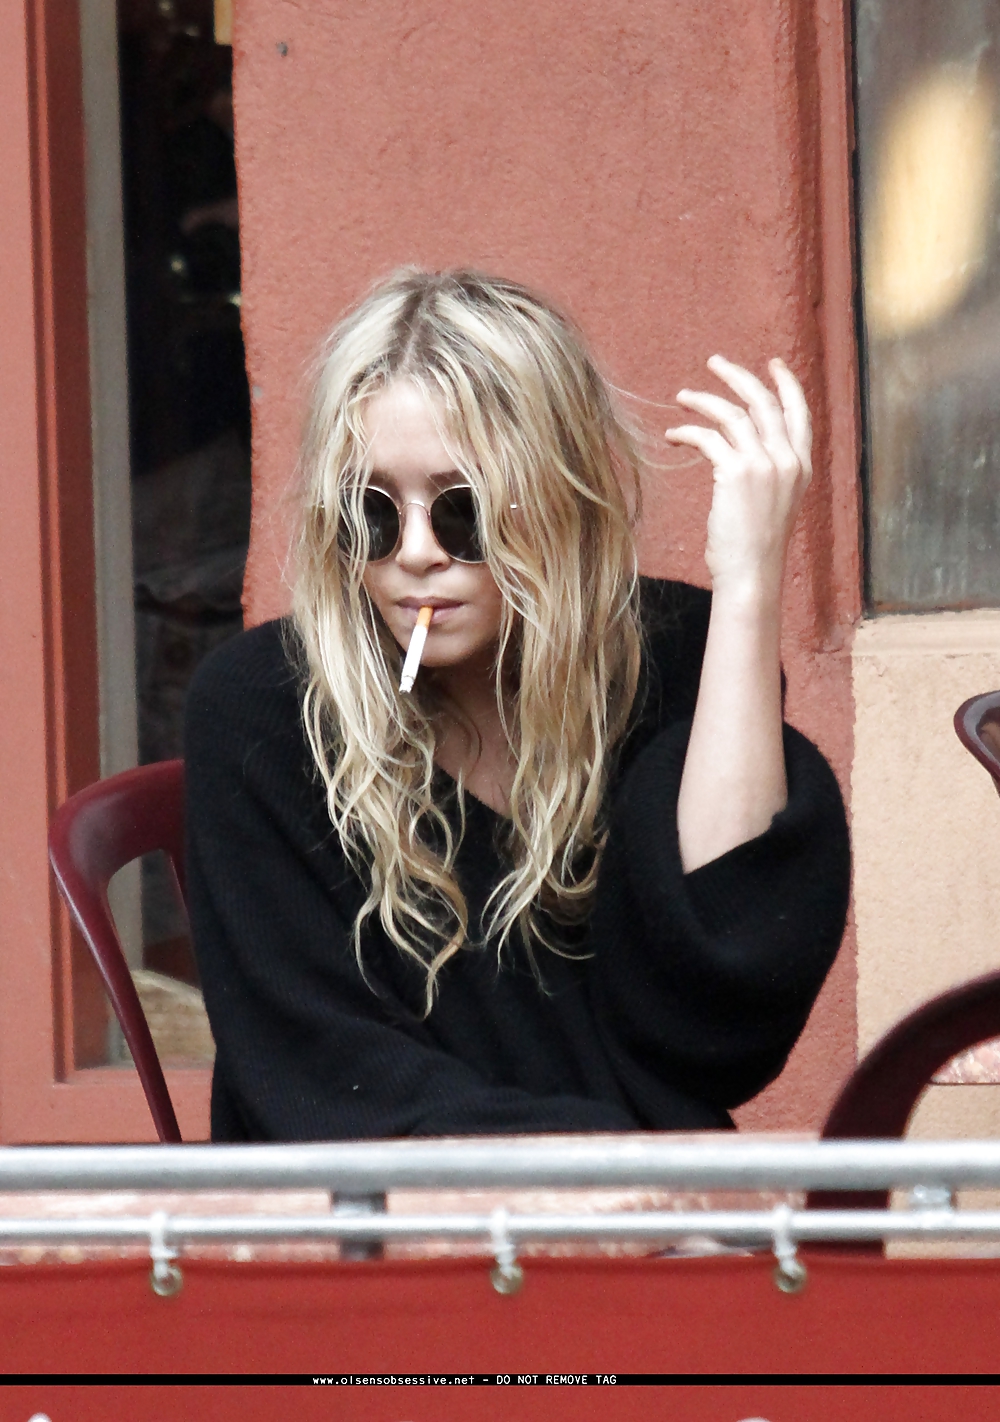 The Olsen Twins Want you to Know they Smoke. #5594501